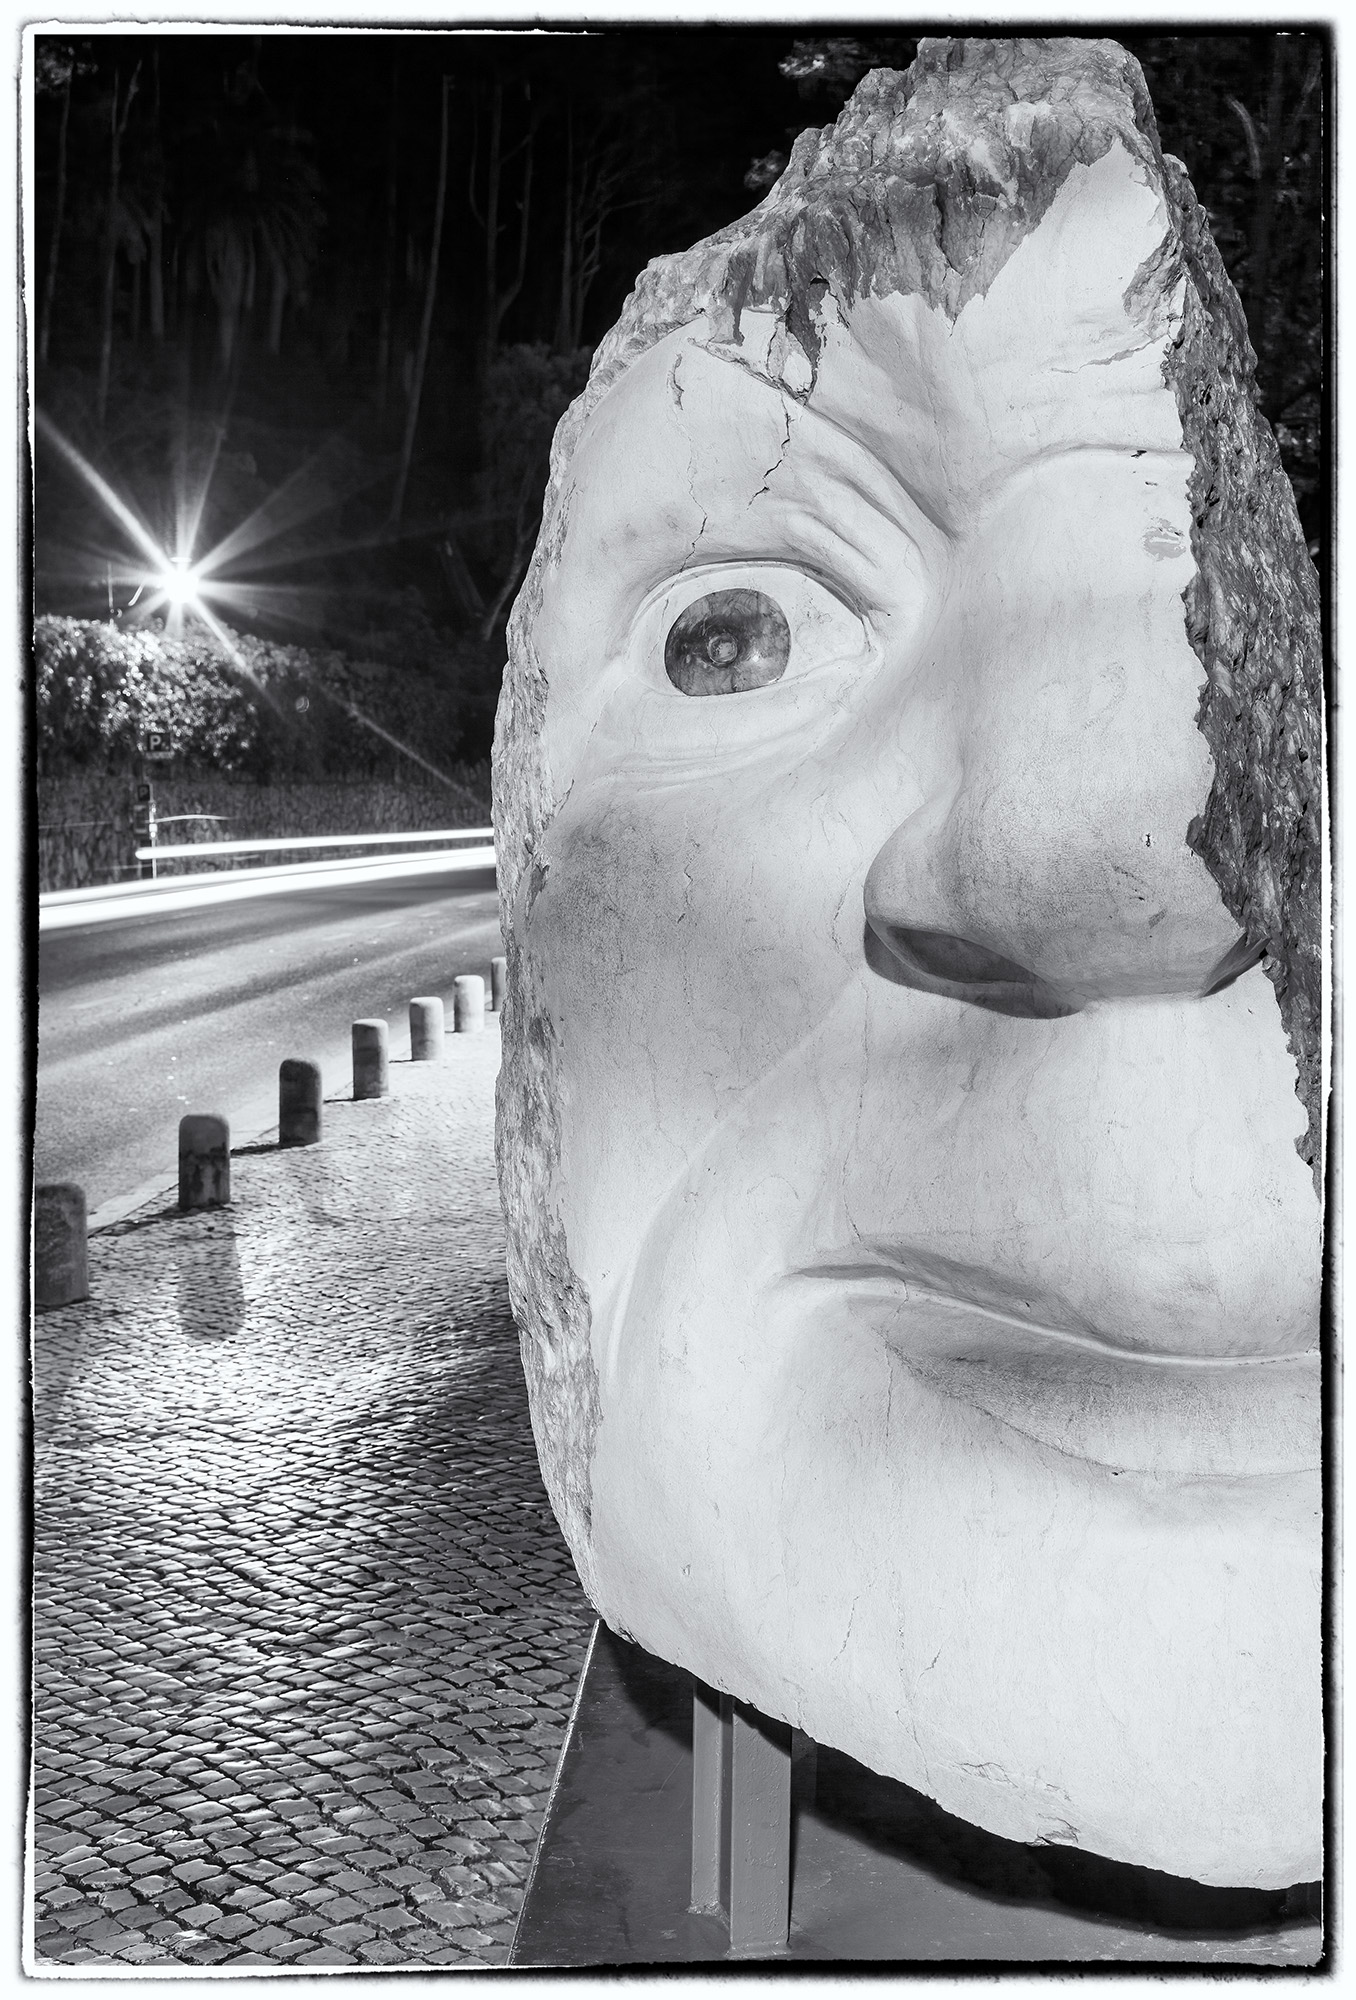 In Sintra, Portugal, I stumbled upon a striking sight one night. This black and white photograph captures a colossal sculpture...